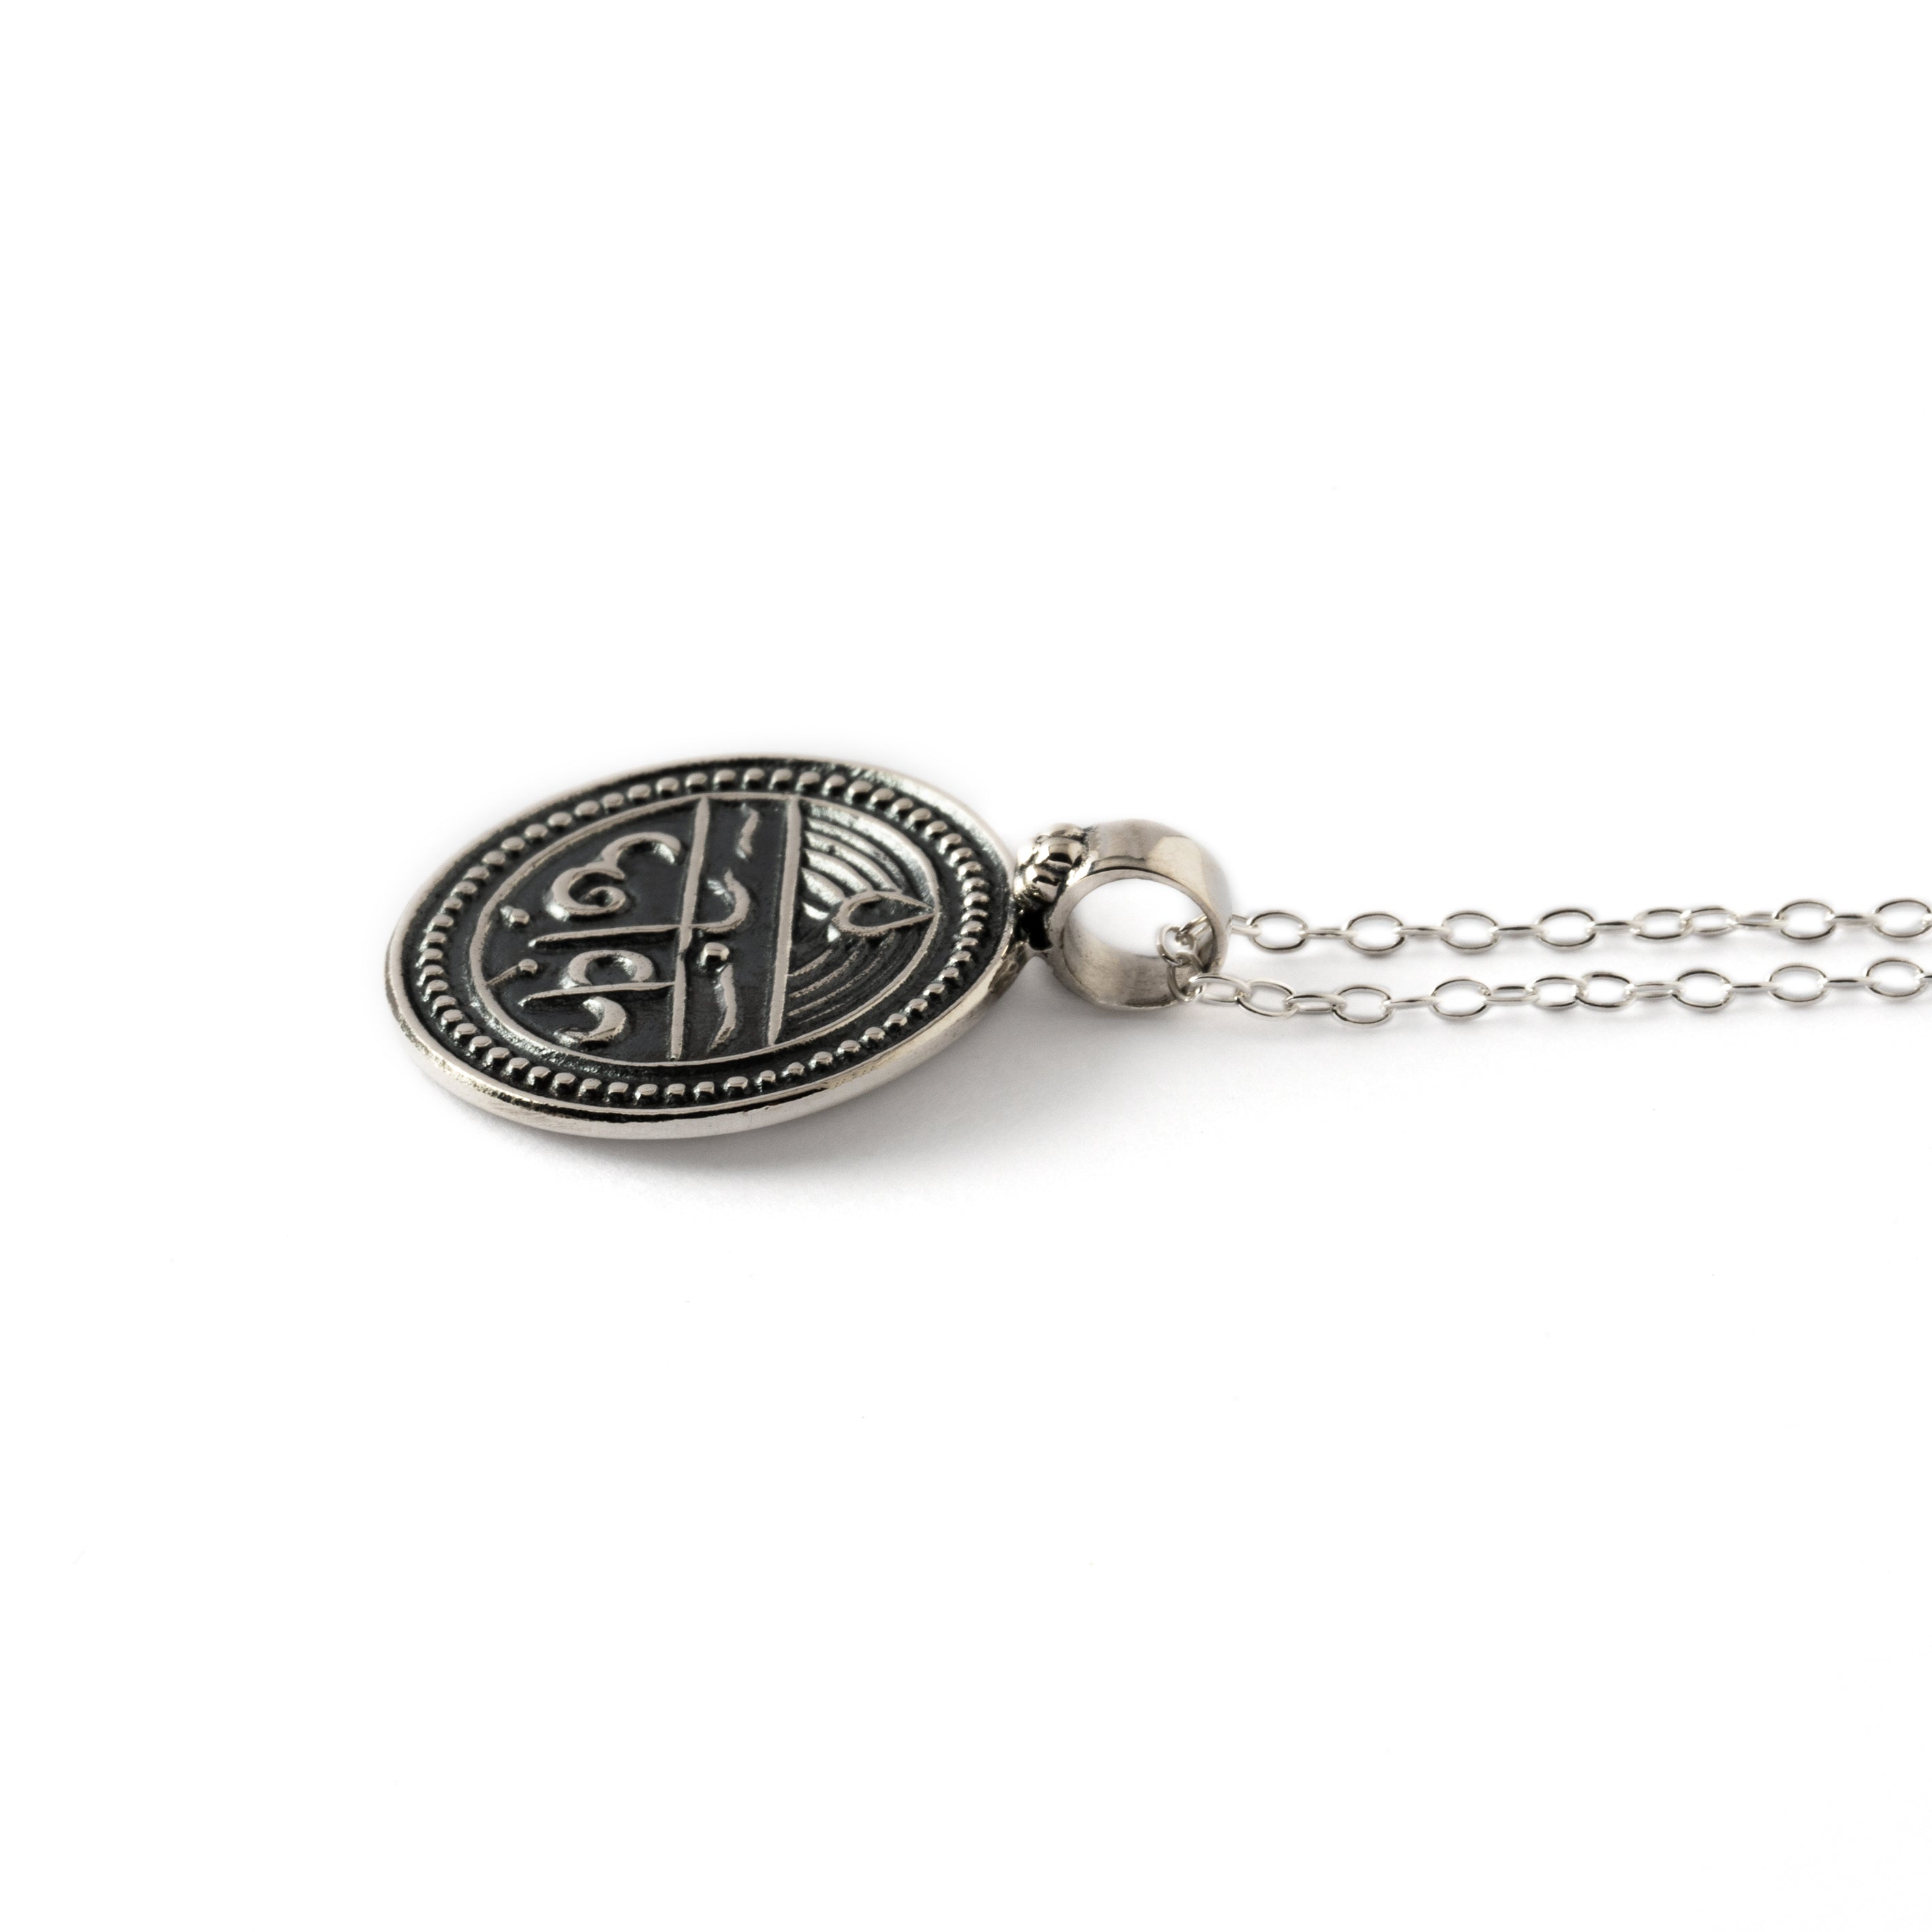 good health protection charm necklace made of oxidised silver side view